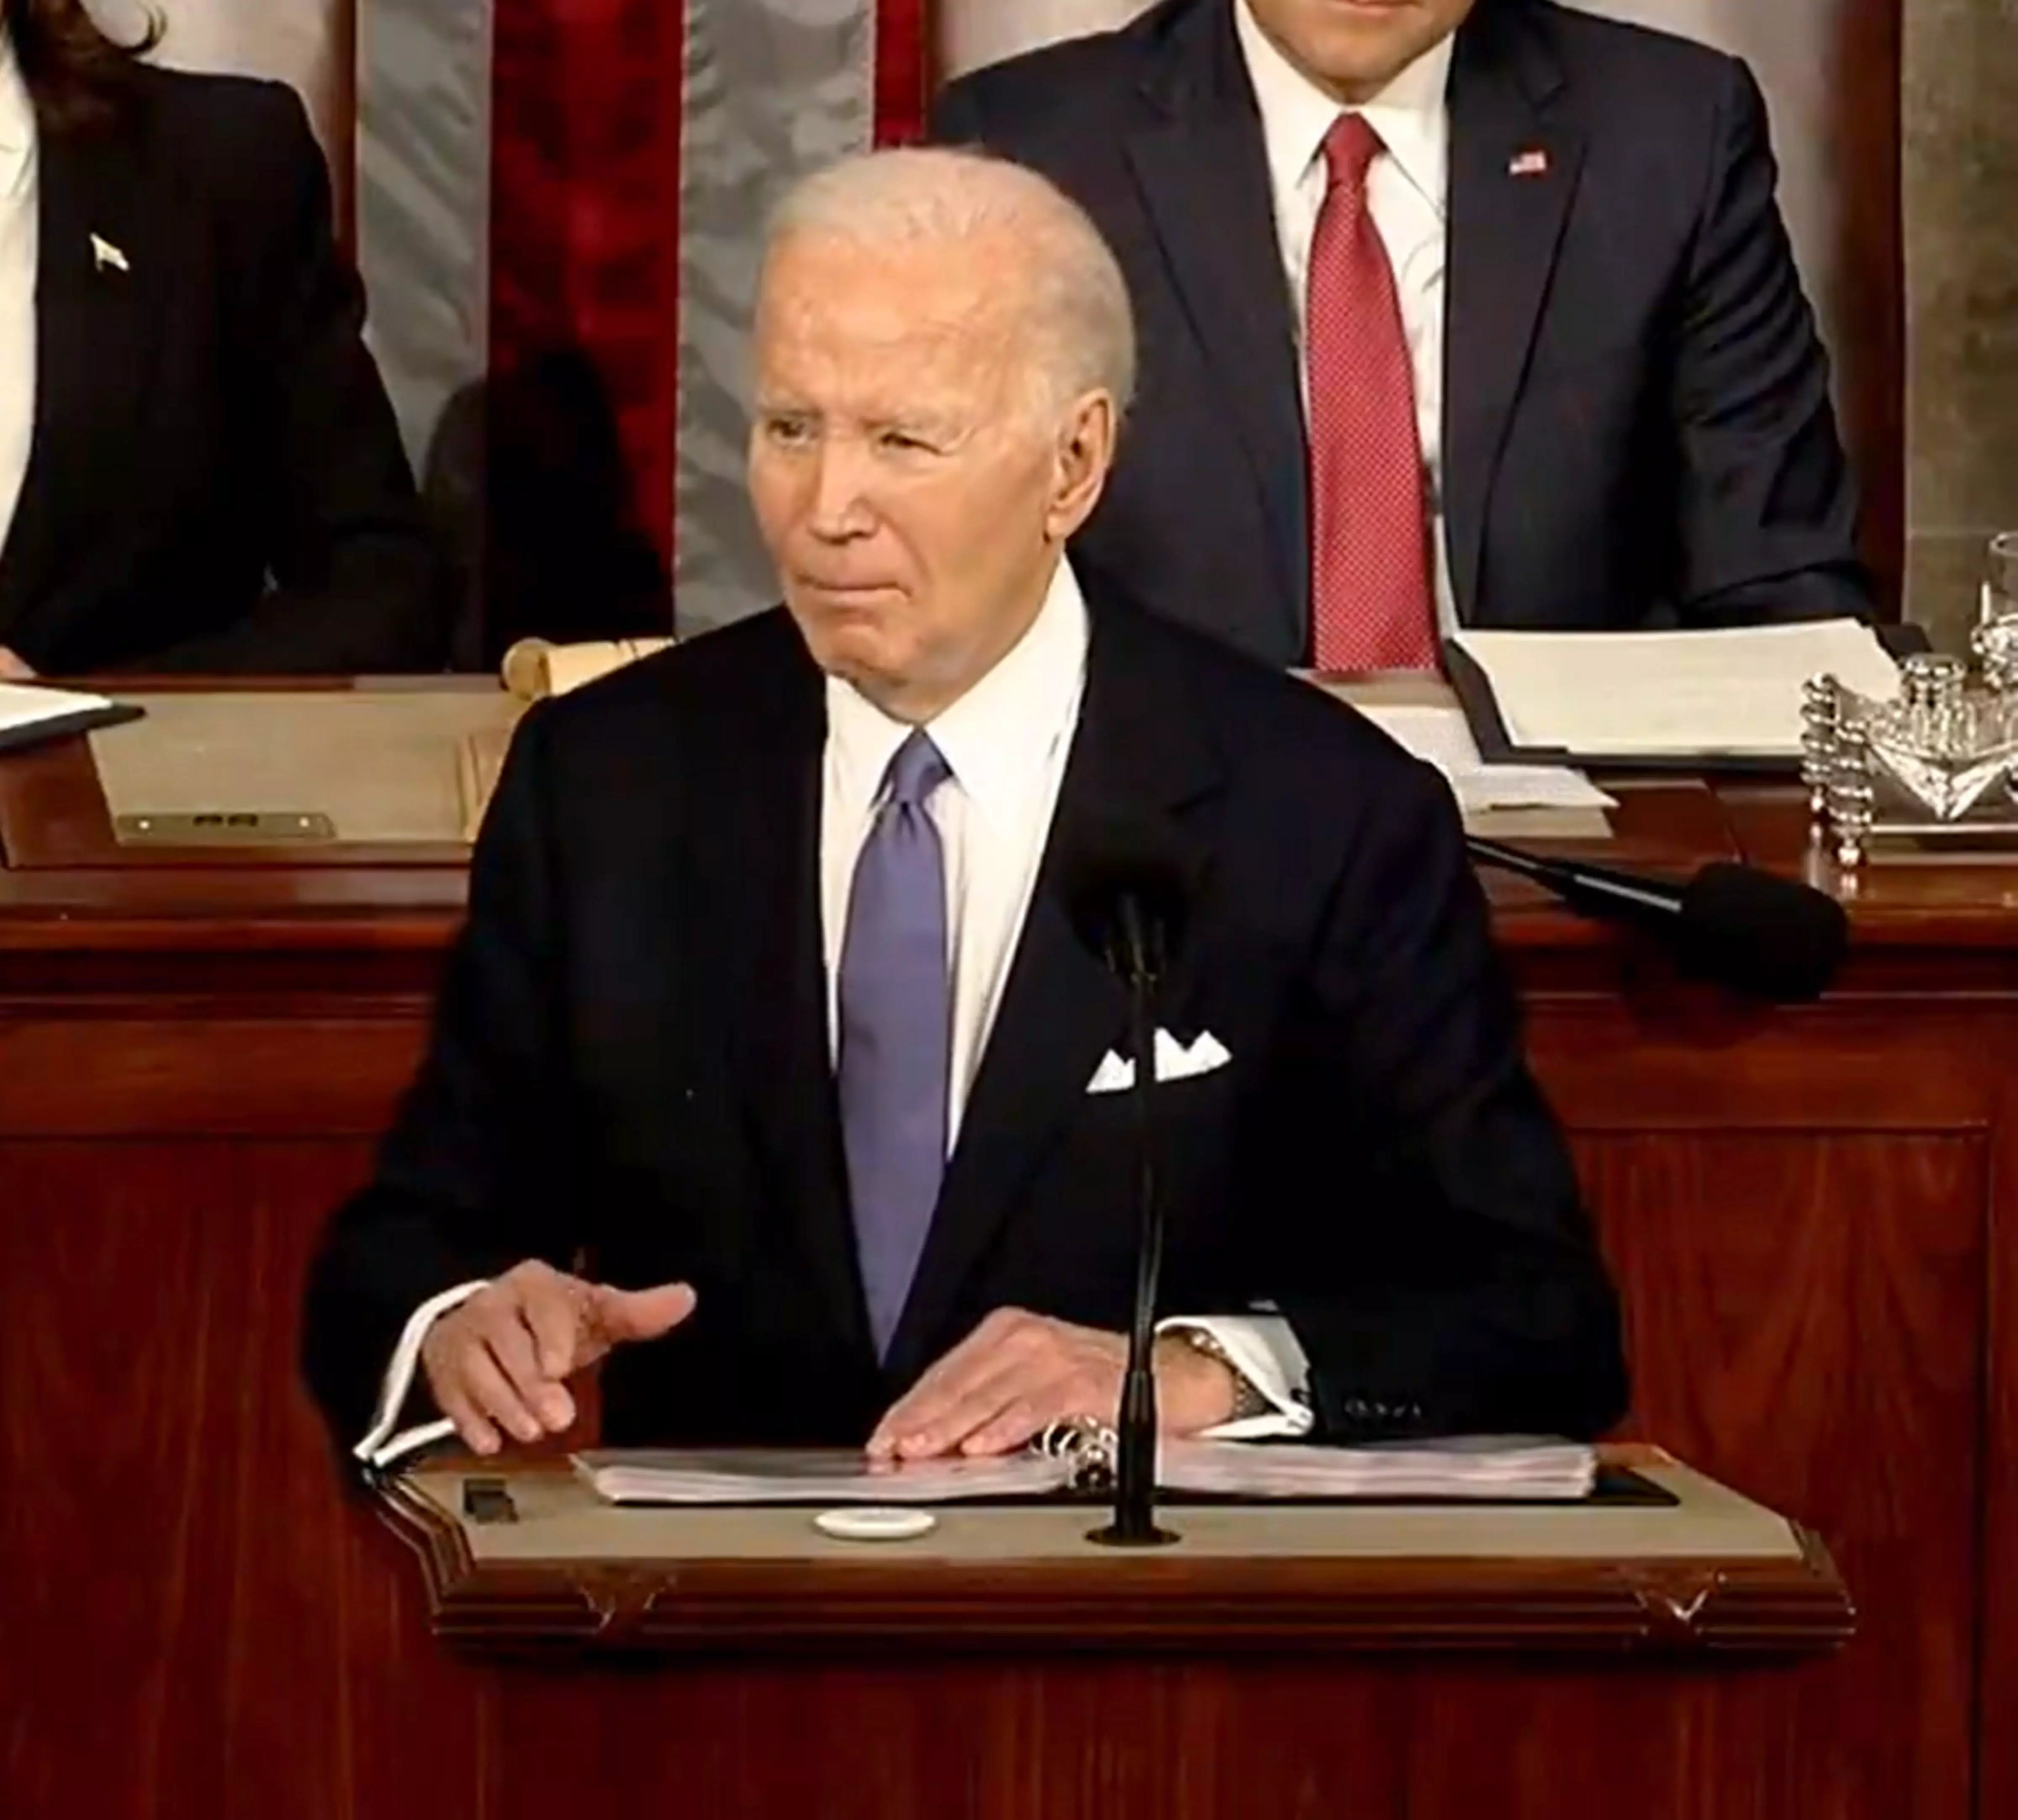 State of the Union Address | Biden slams Trump; says democracy under threat in US and world